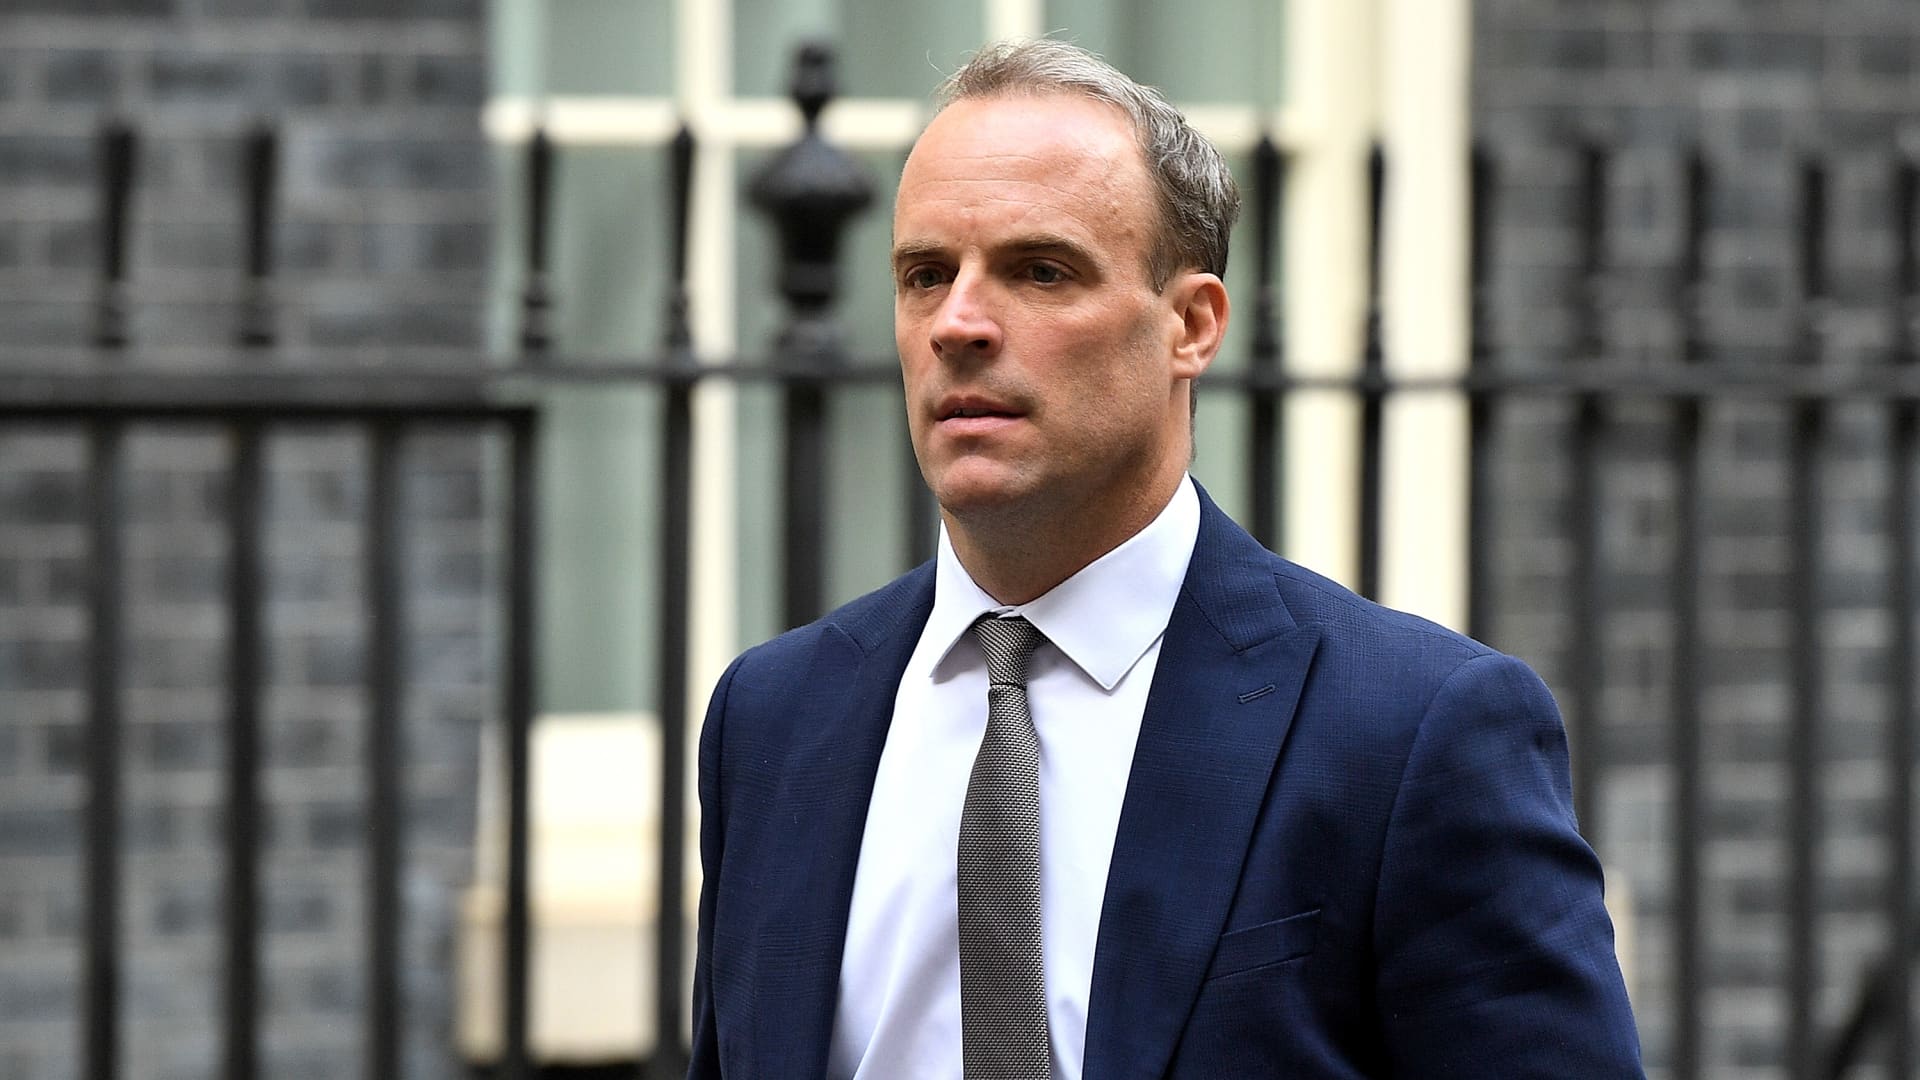 Dominic Raab, First Secretary of State and Secretary of State for Foreign and Commonwealth Affairs walks in Downing Street on September 3, 2019 in London, England.